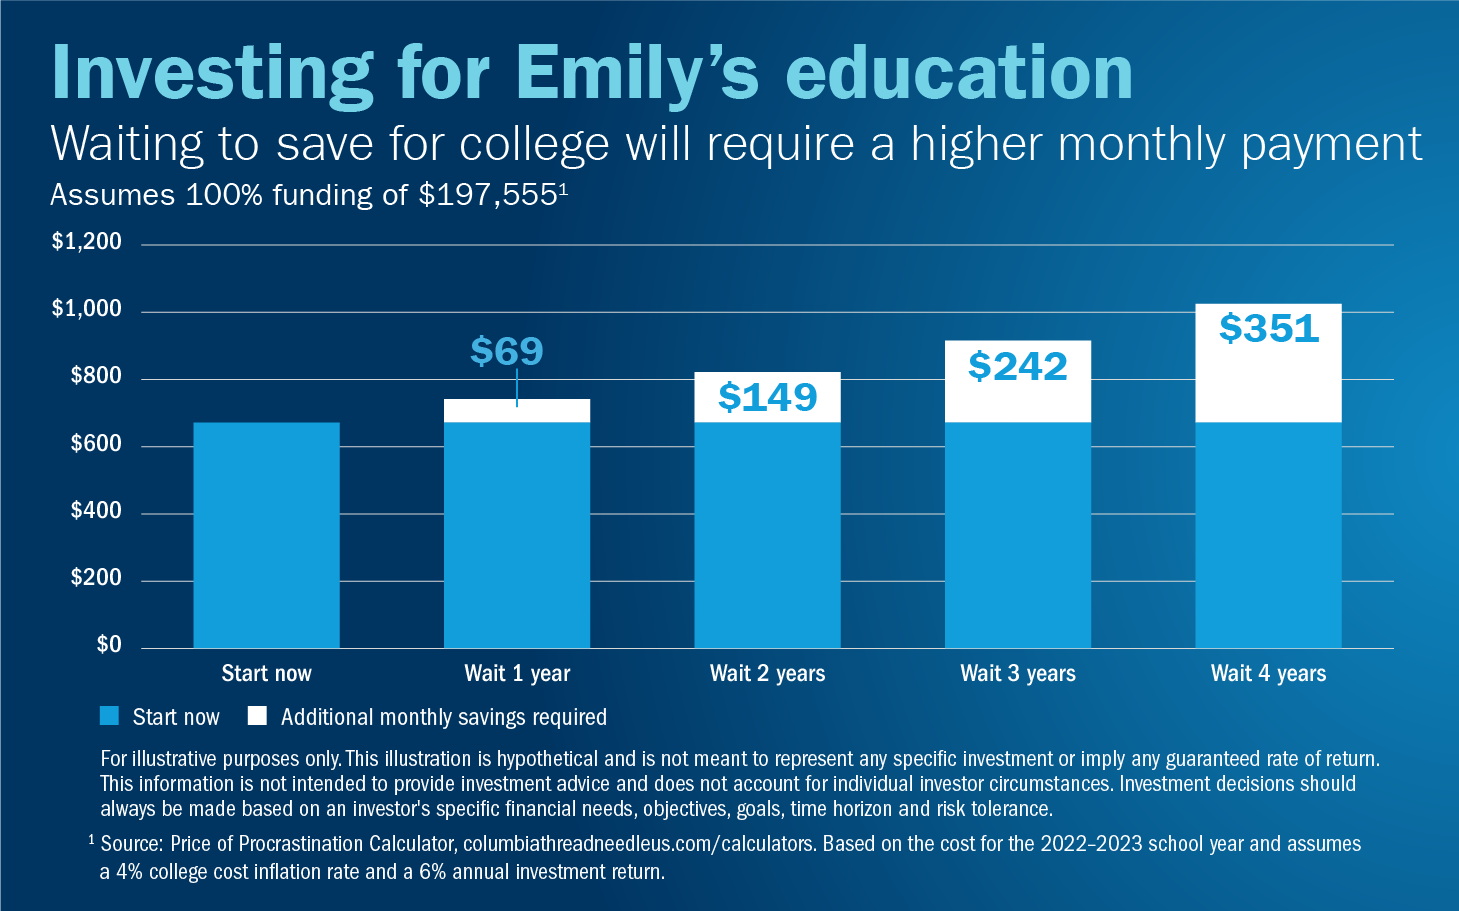 Bar chart showing that if the Wards start saving for Emily’s college tuition today, they will need to save $667 per month. Waiting one more year will require an additional $69 per month; two more years will require an additional $149 per month; three more years will require an additional $242 per month; and four more years will require an additional $351 per month.